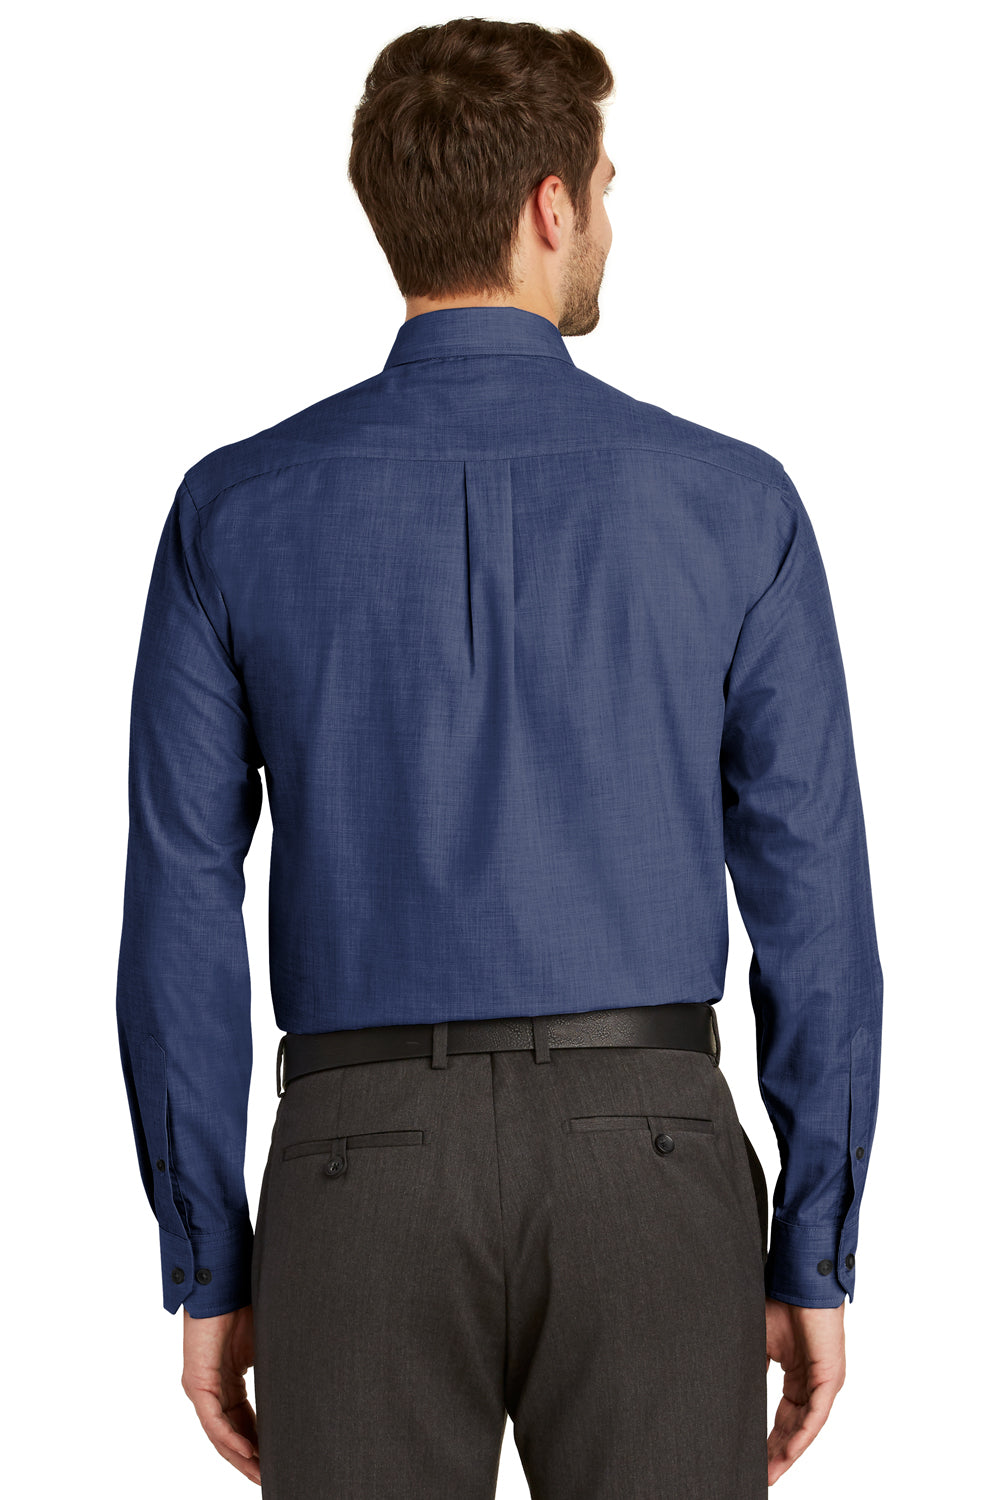 Port Authority S640 Mens Easy Care Wrinkle Resistant Long Sleeve Button Down Shirt w/ Pocket Deep Blue Back